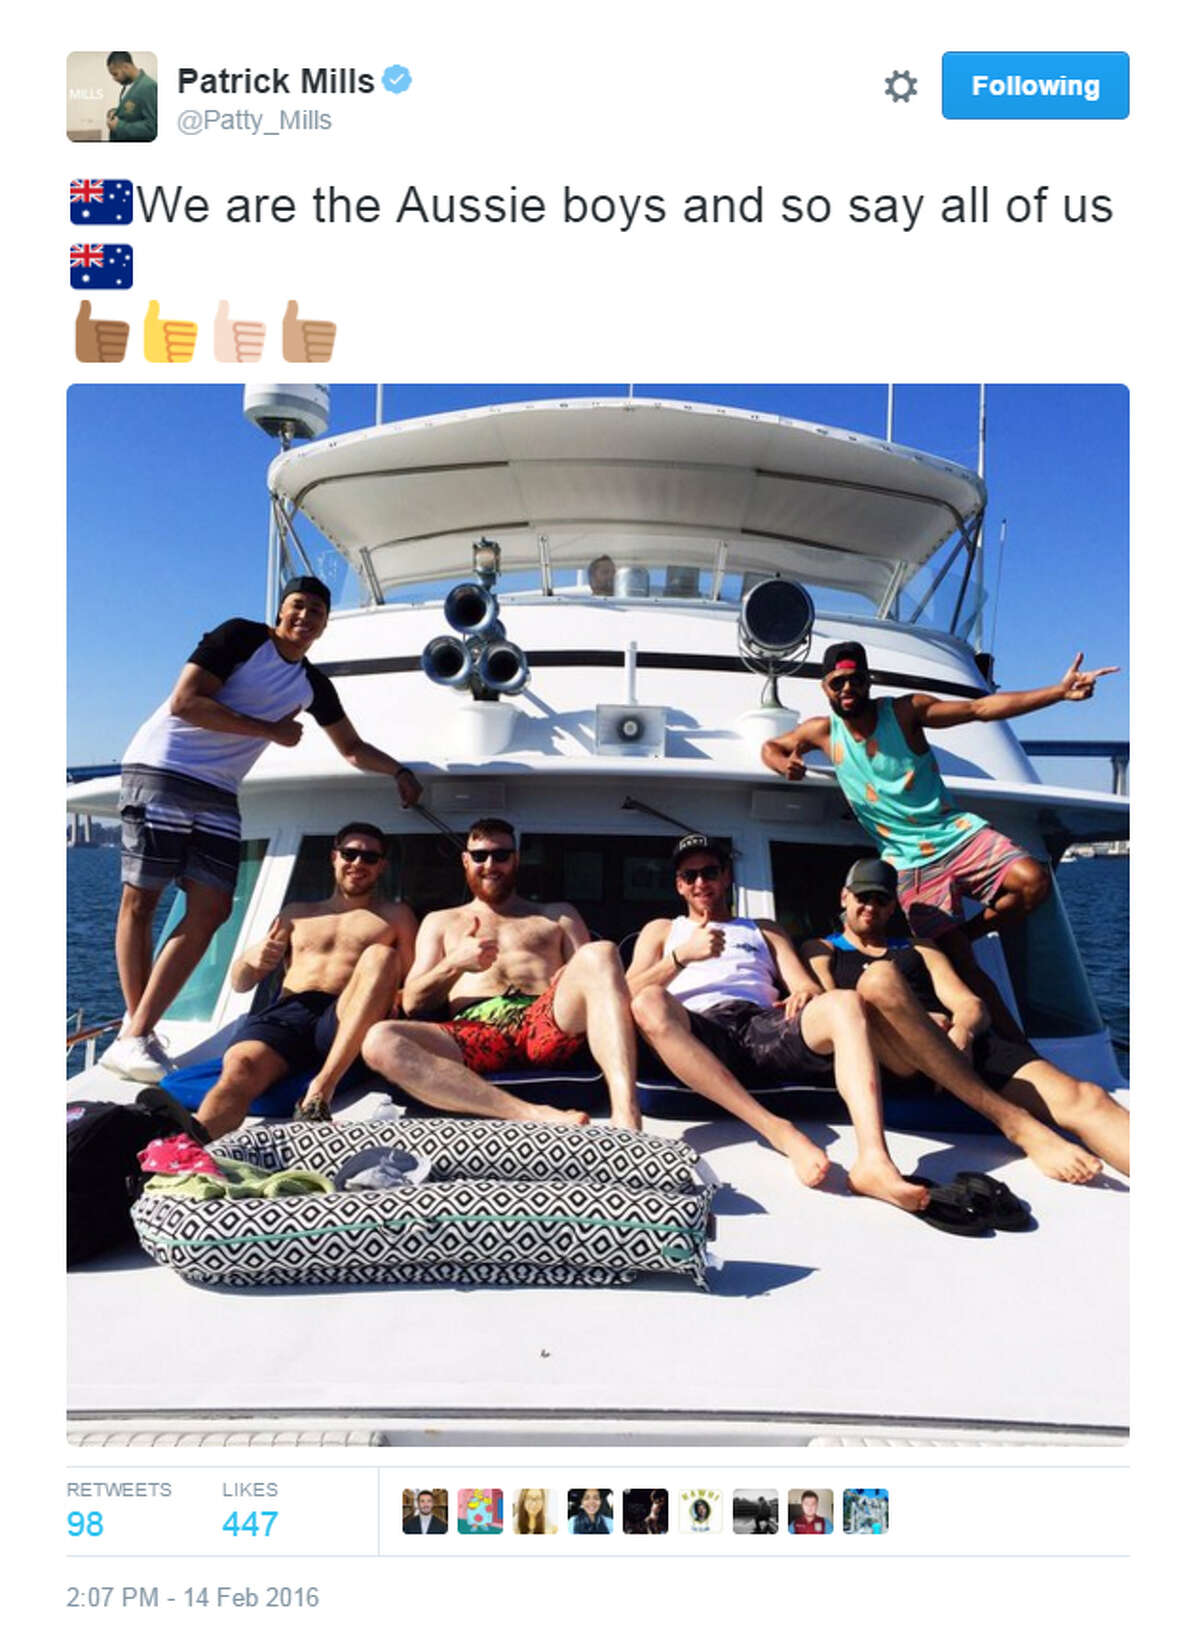 Patty Mills posted this photo of "the Aussie boys" on Valentine's Day.